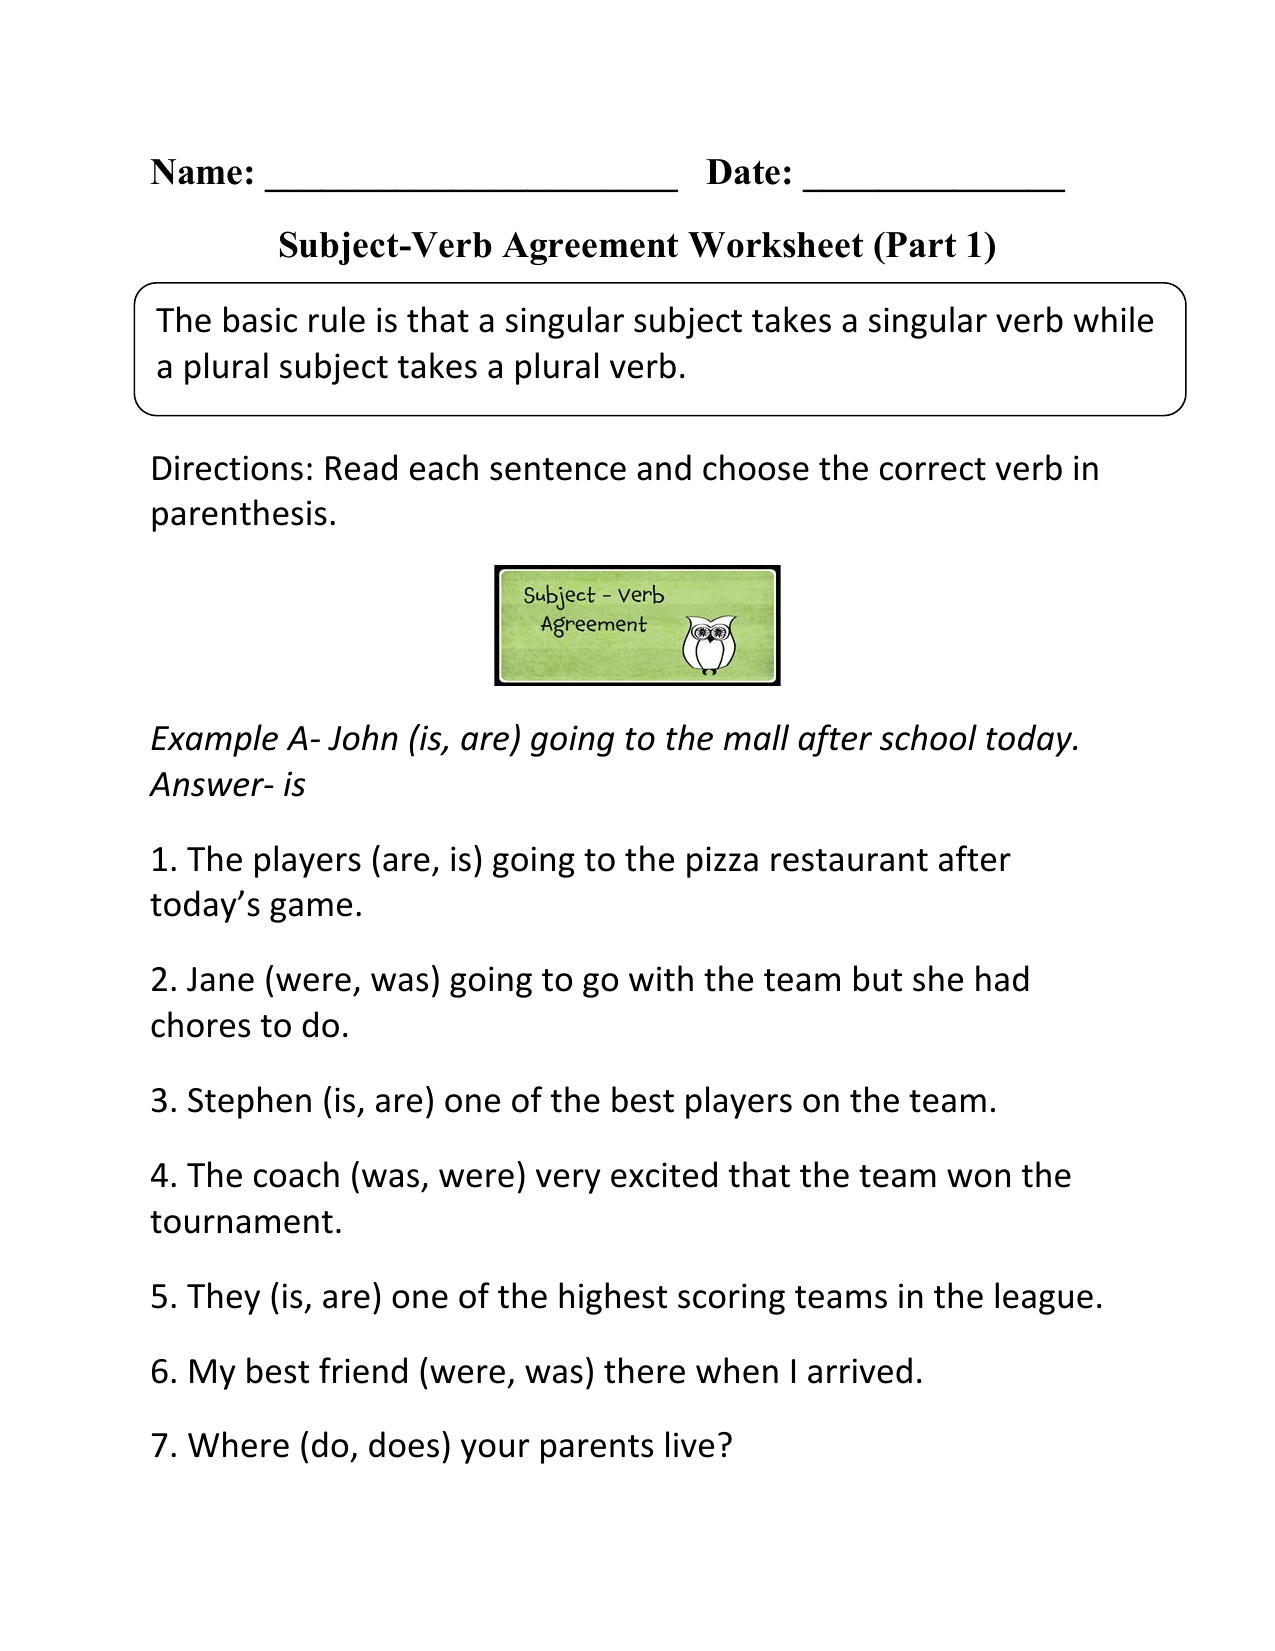 subject-verb-agreement-worksheets-verb-agreement-subject-worksheets-printable-esl-worksheet